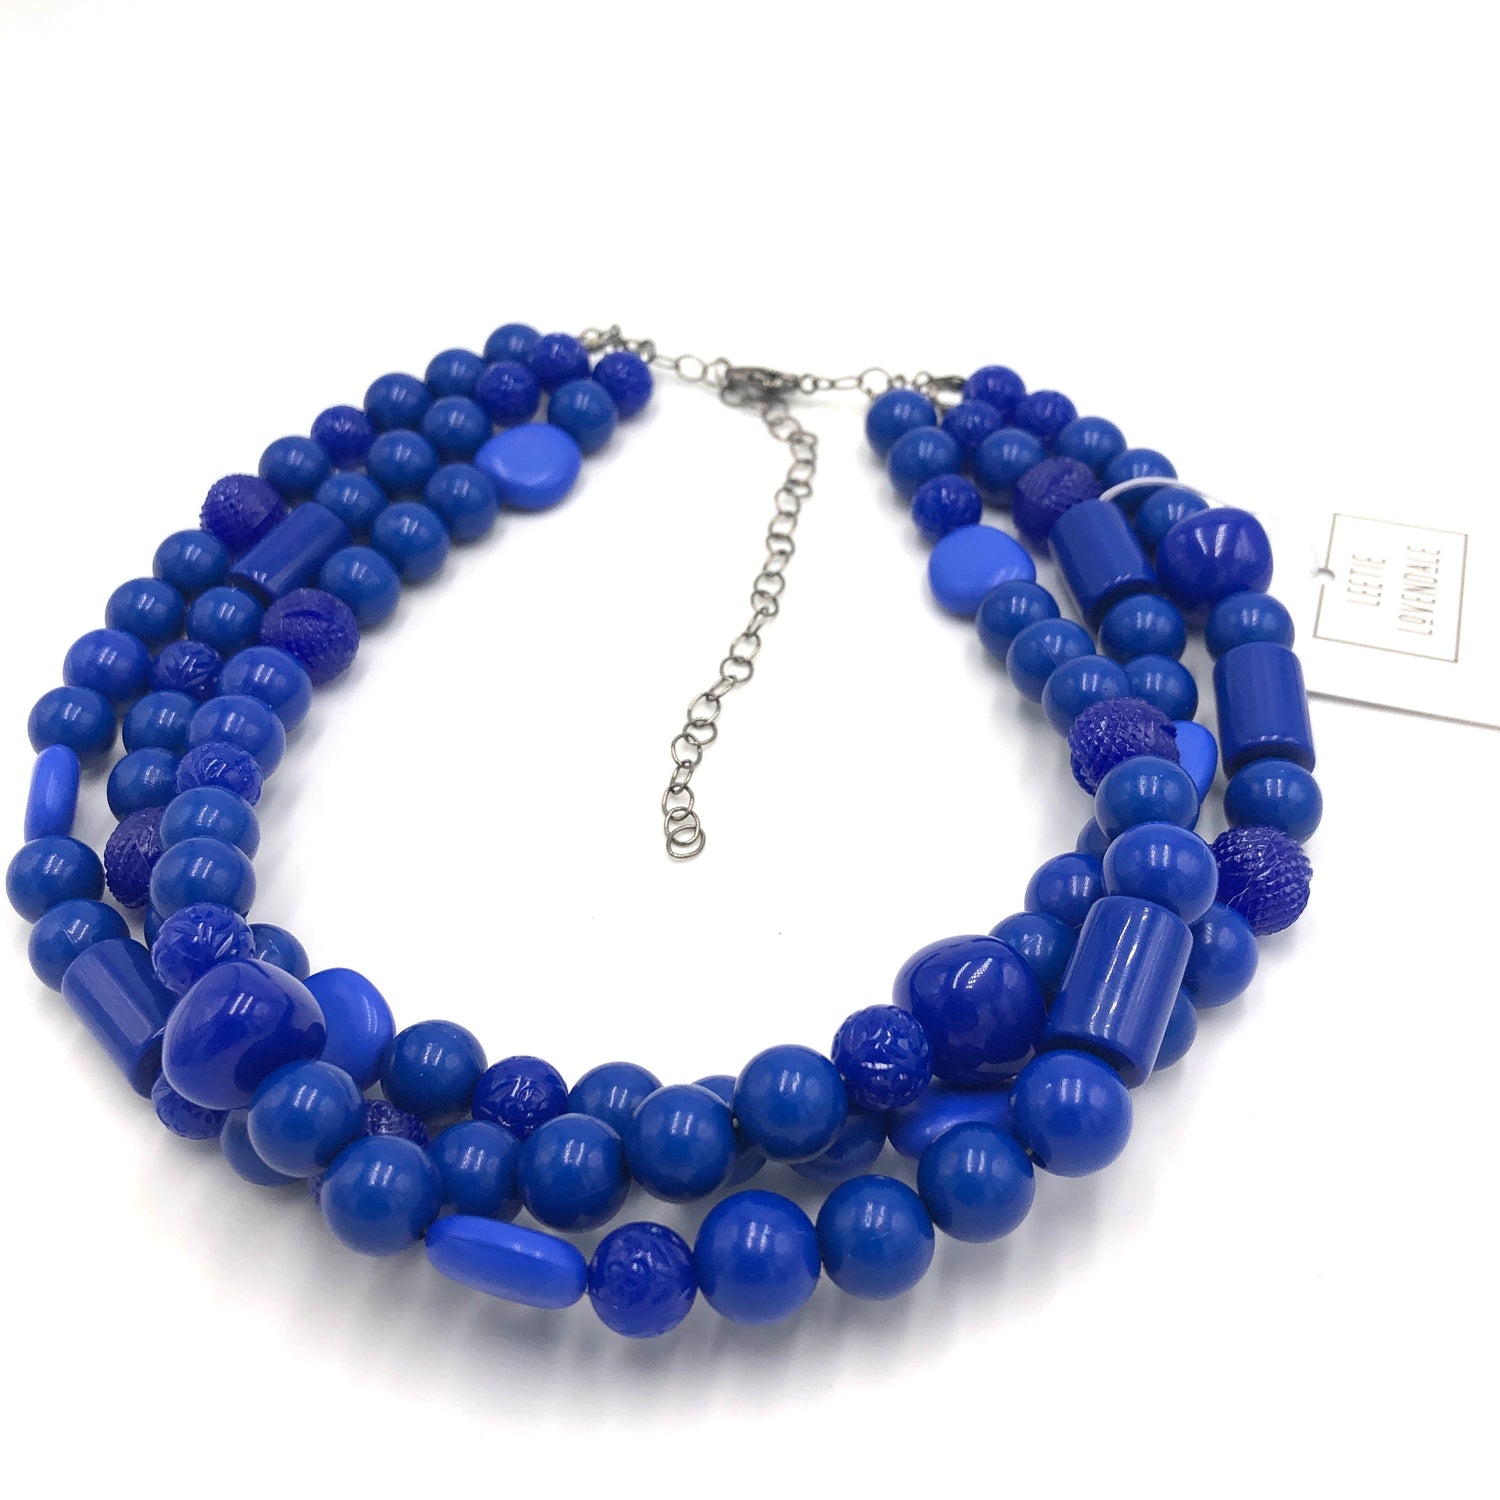 True Blue Knotted Morgan Necklace